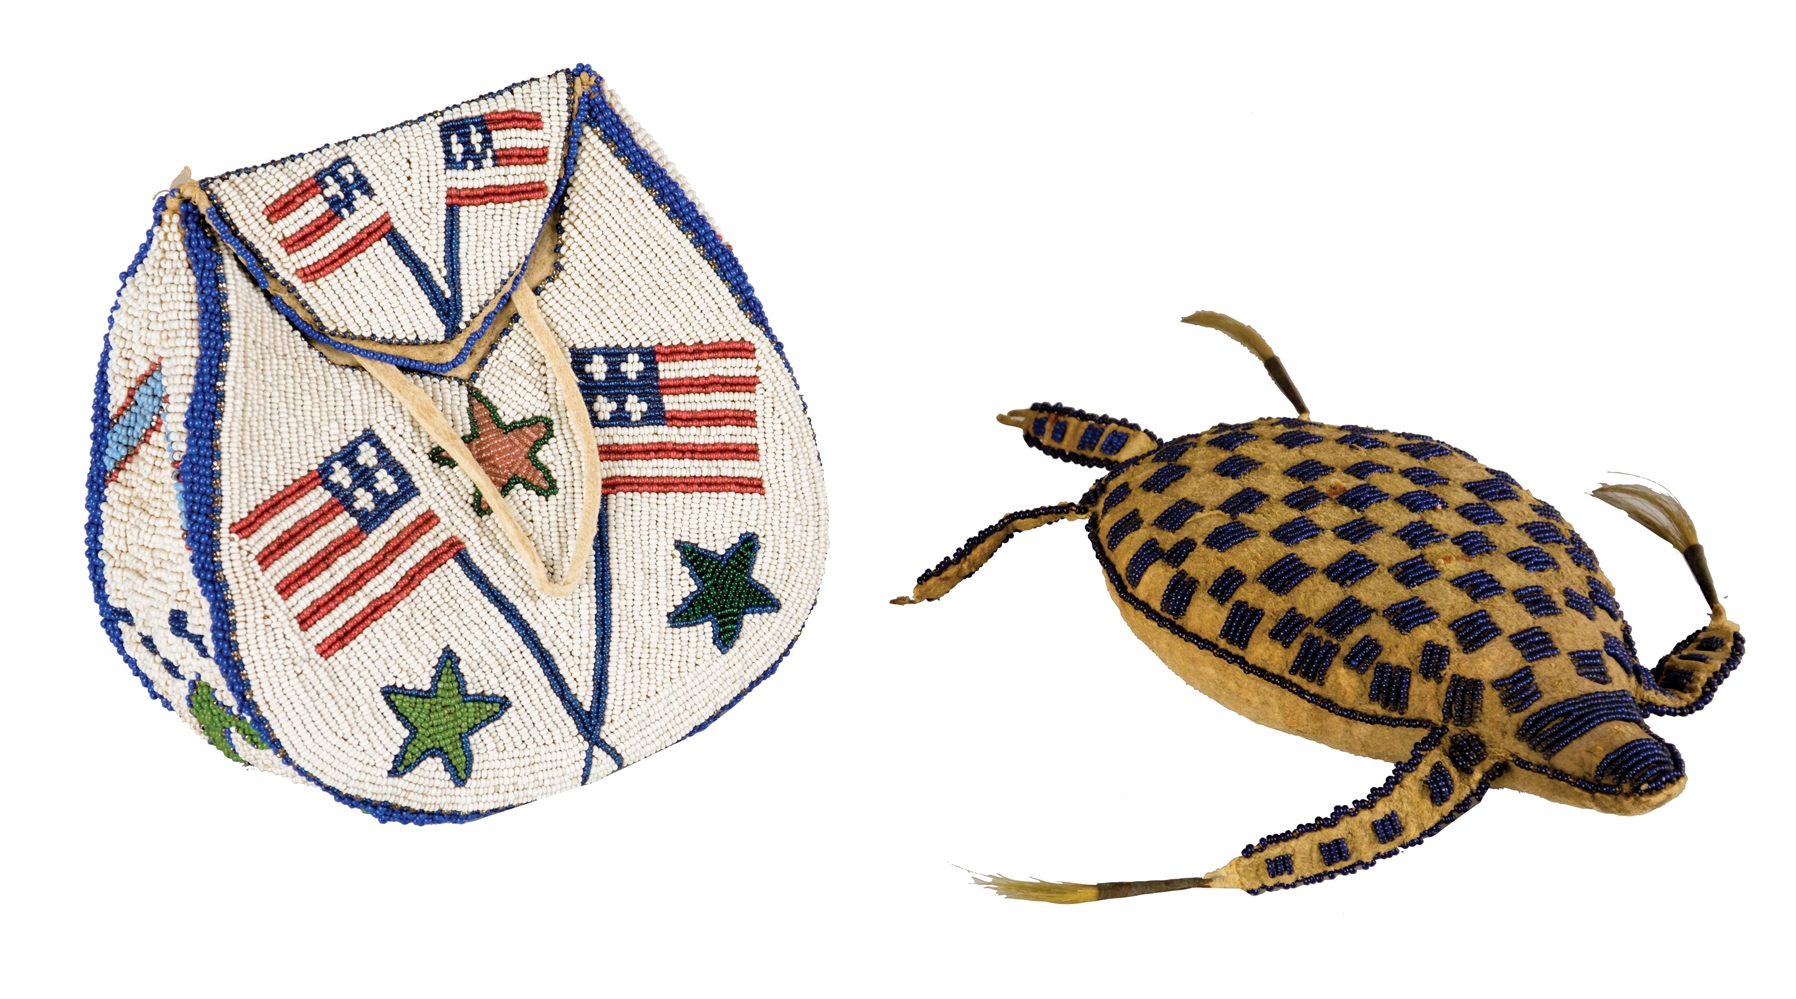 LOT OF 2: SIOUX TURTLE FETISH AND EASTERN SIOUX PATRIOTIC BEADED BAG.